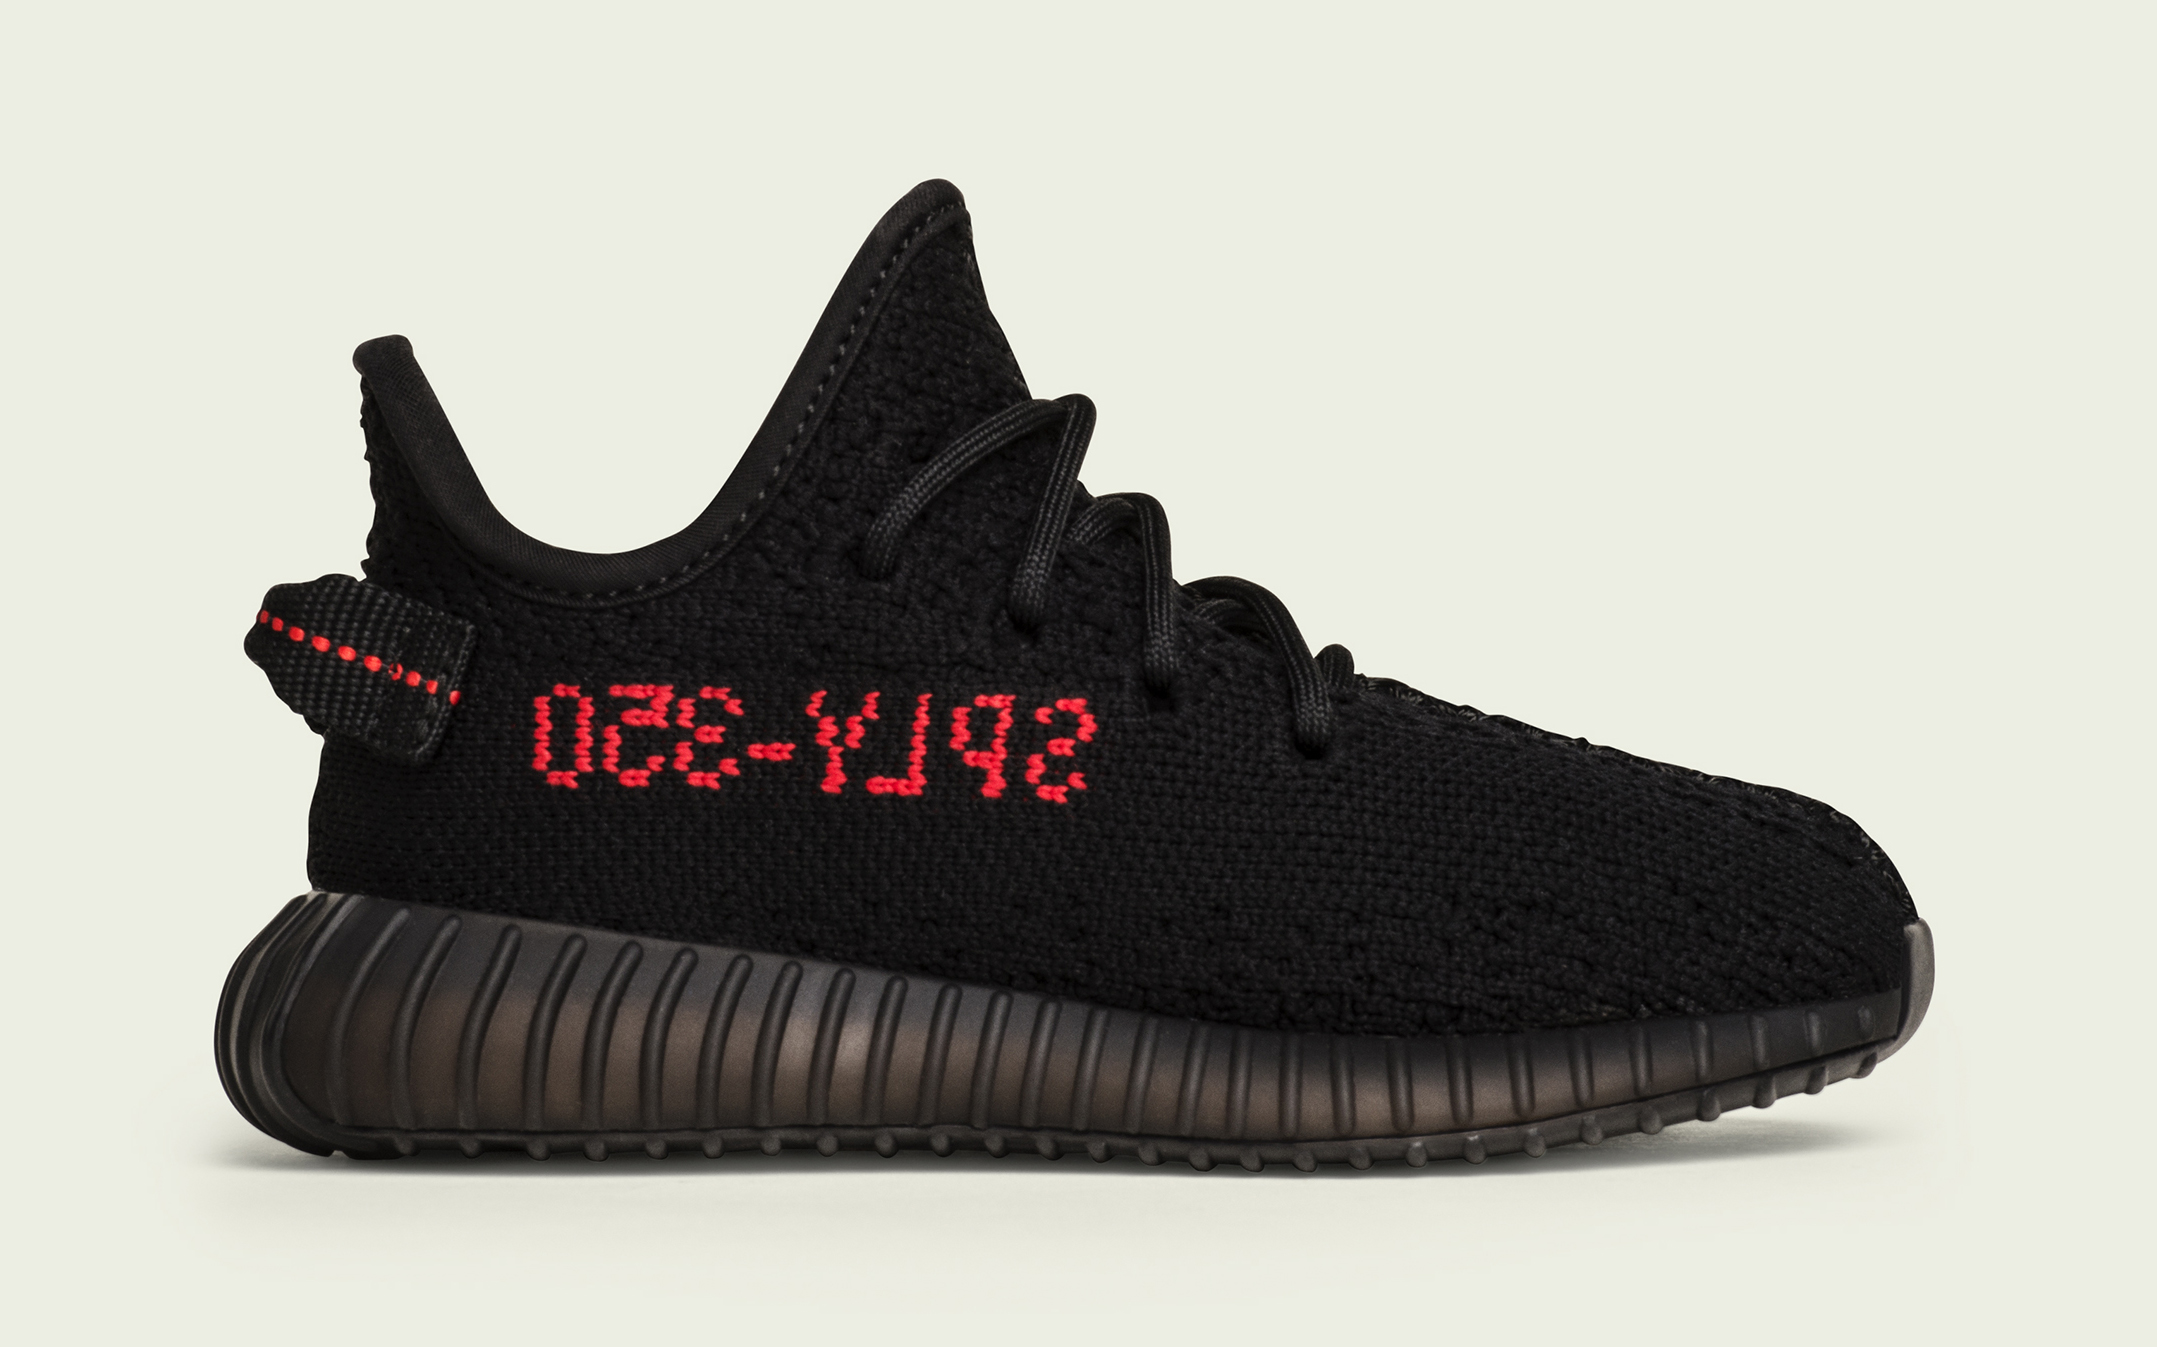 Adidas Yeezy Boost 350 V2 'Core Black/Red': What They Cost And Where To